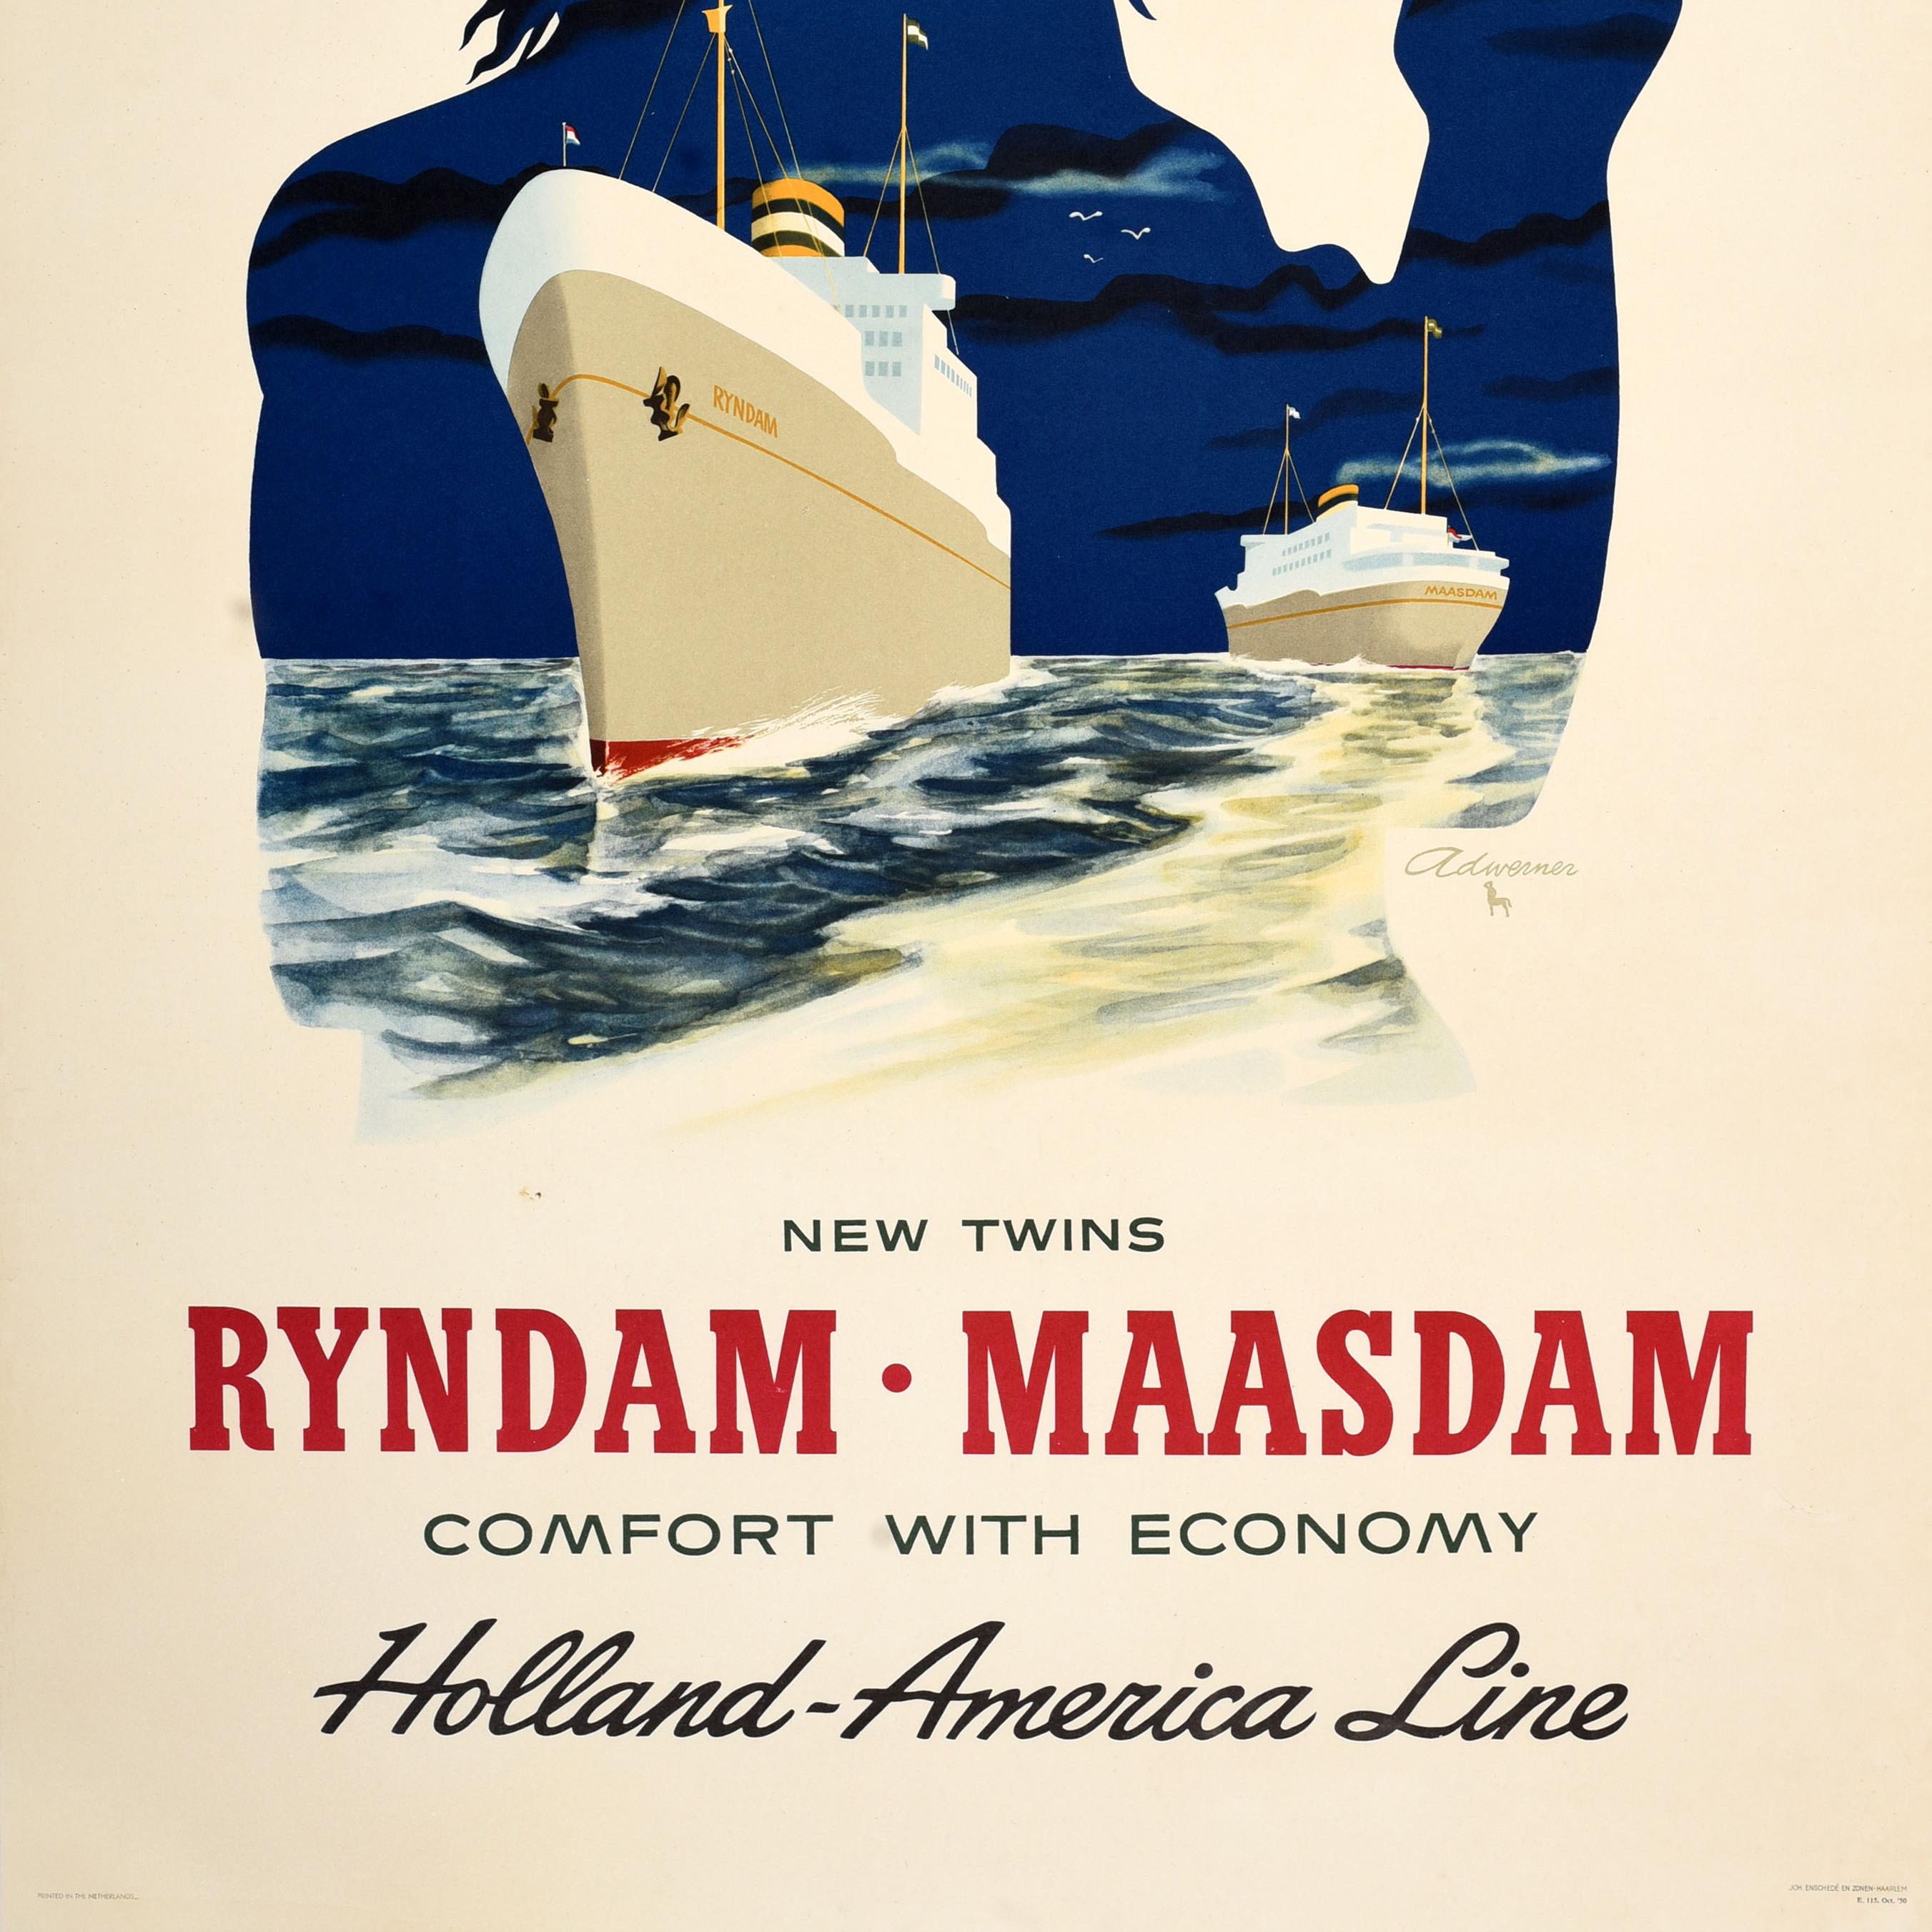 Original vintage cruise travel poster - A New Concept in Tourist Travel New Twins Ryndam Maasdam Comfort with Economy Holland-America Line - featuring a great design by the Dutch graphic designer Ad Werner (Adrianus Gerardus Werner; 1925-2017) of